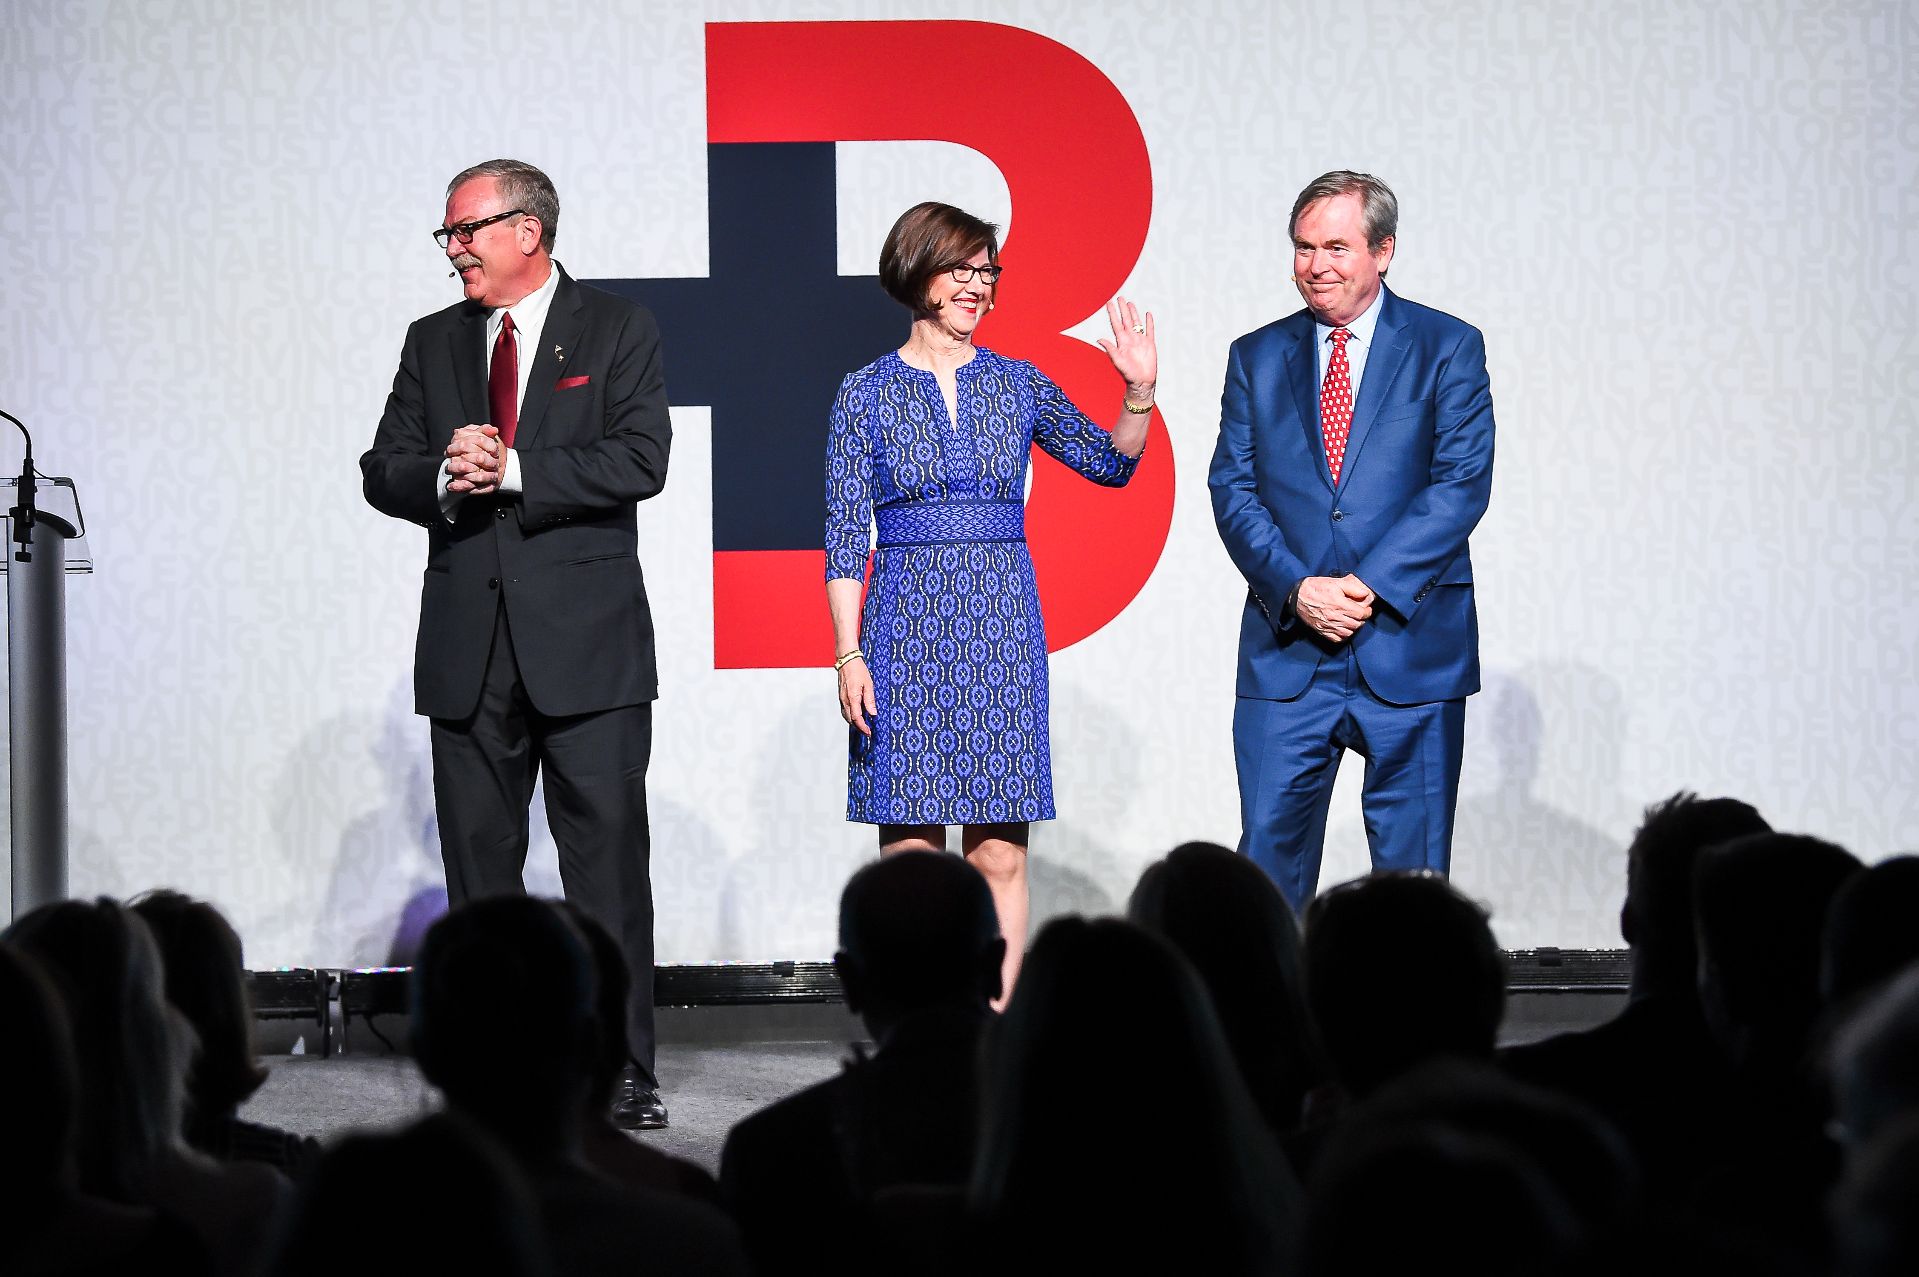 Co-chairs of The Bates Campaign are, from left, John Gillespie ’80, P’13, P’18; Geraldine FitzGerald ’75; and Michael Bonney '80, P'09, P'12, P'15. (Andree Kehn for Bates College)